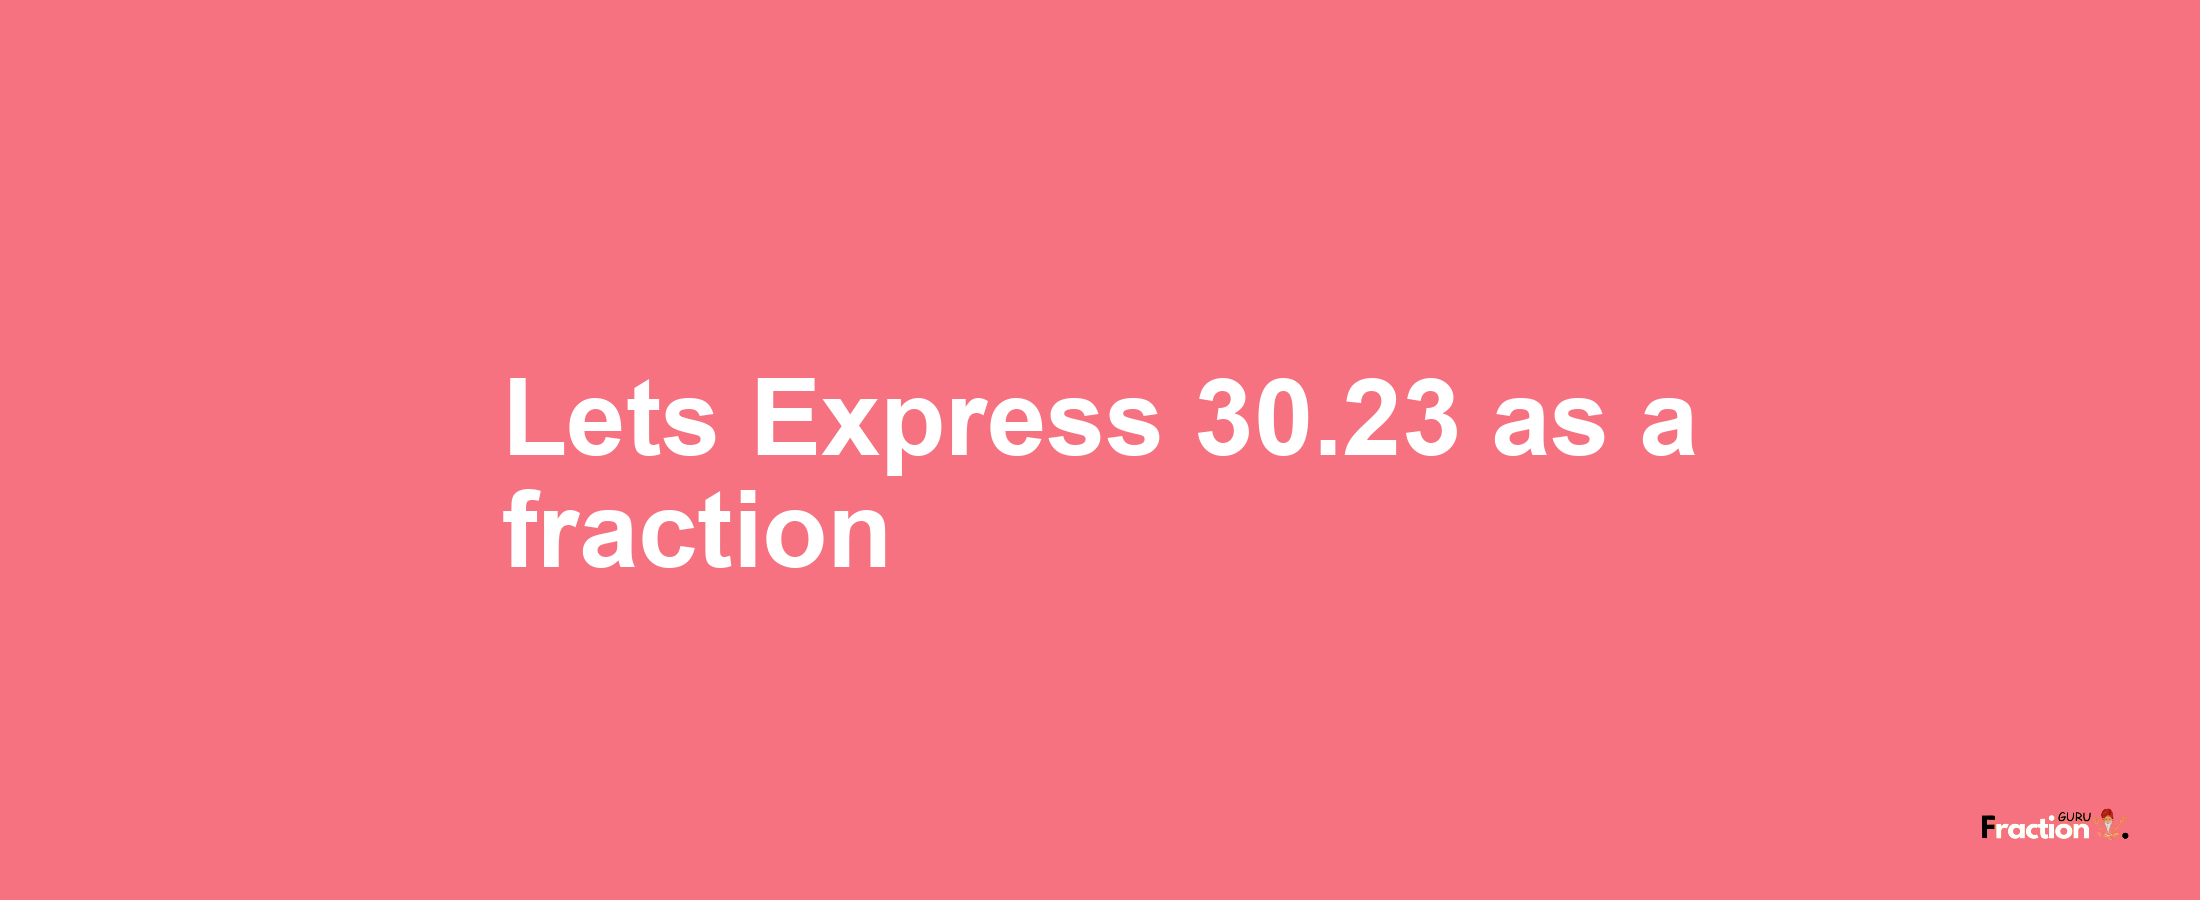 Lets Express 30.23 as afraction